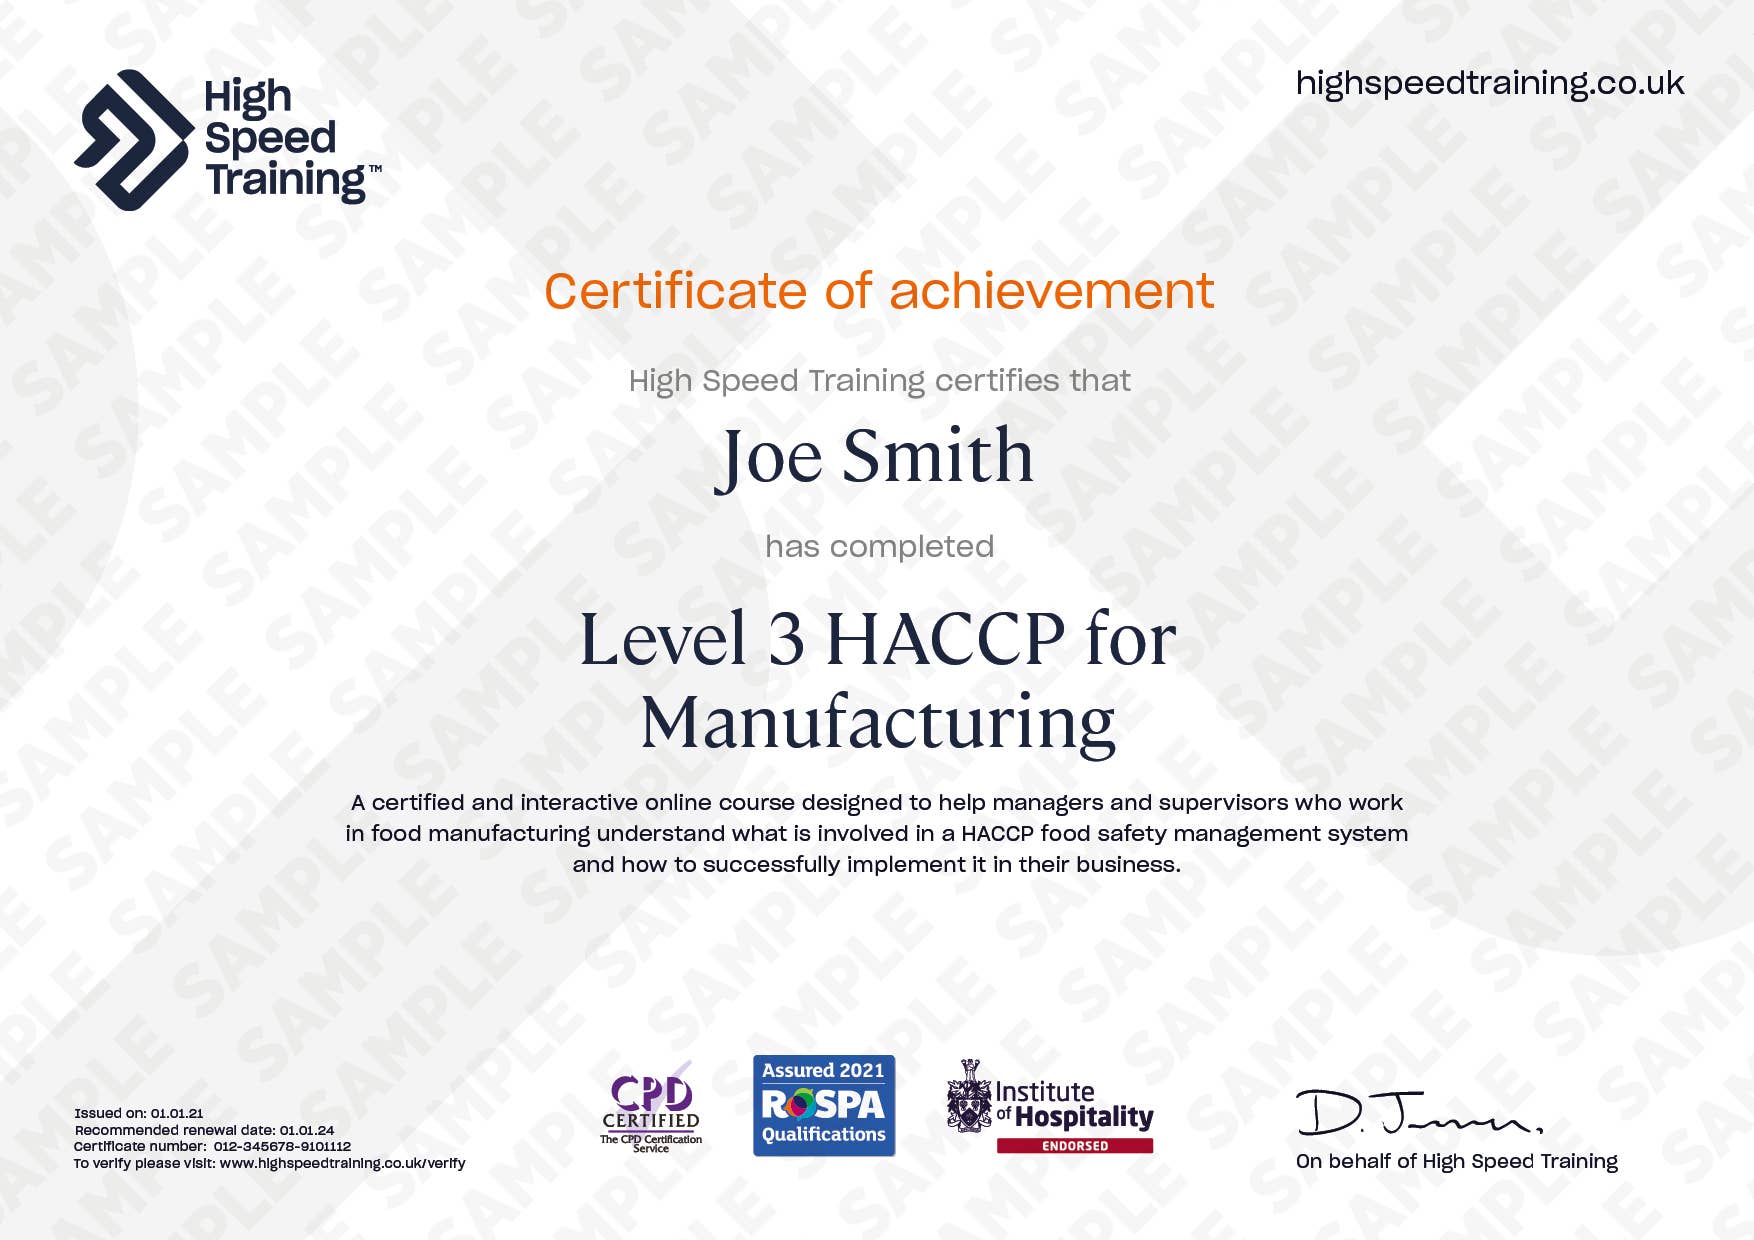 Level 3 HACCP for Manufacturing